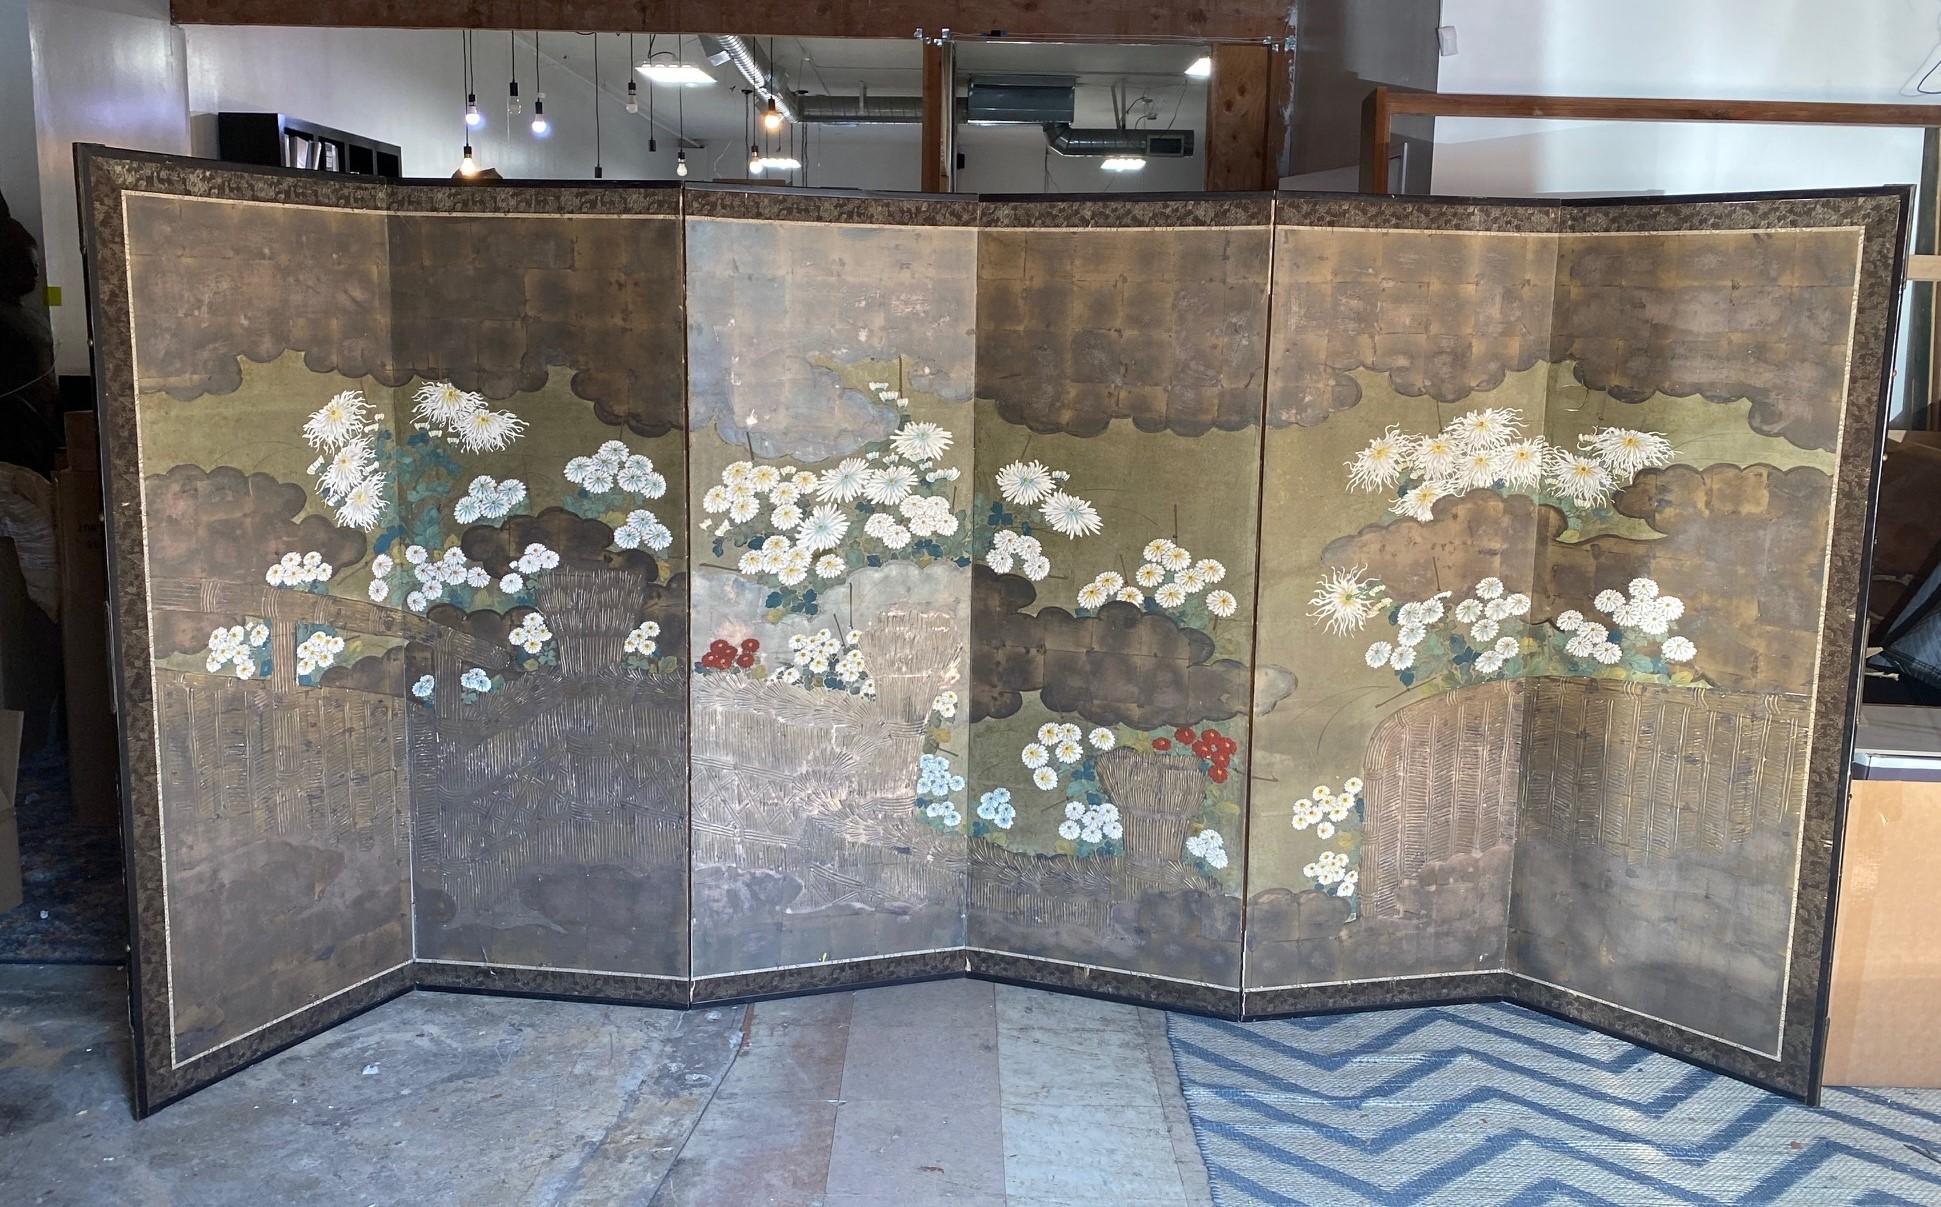 A gorgeous six-panel Japanese Byobu folding screen depicting a floral landscape scene from the perspective of looking over a home veranda. The rich colors, gold leaf, and beautiful hand-painted detail really make this an attractive and special work.